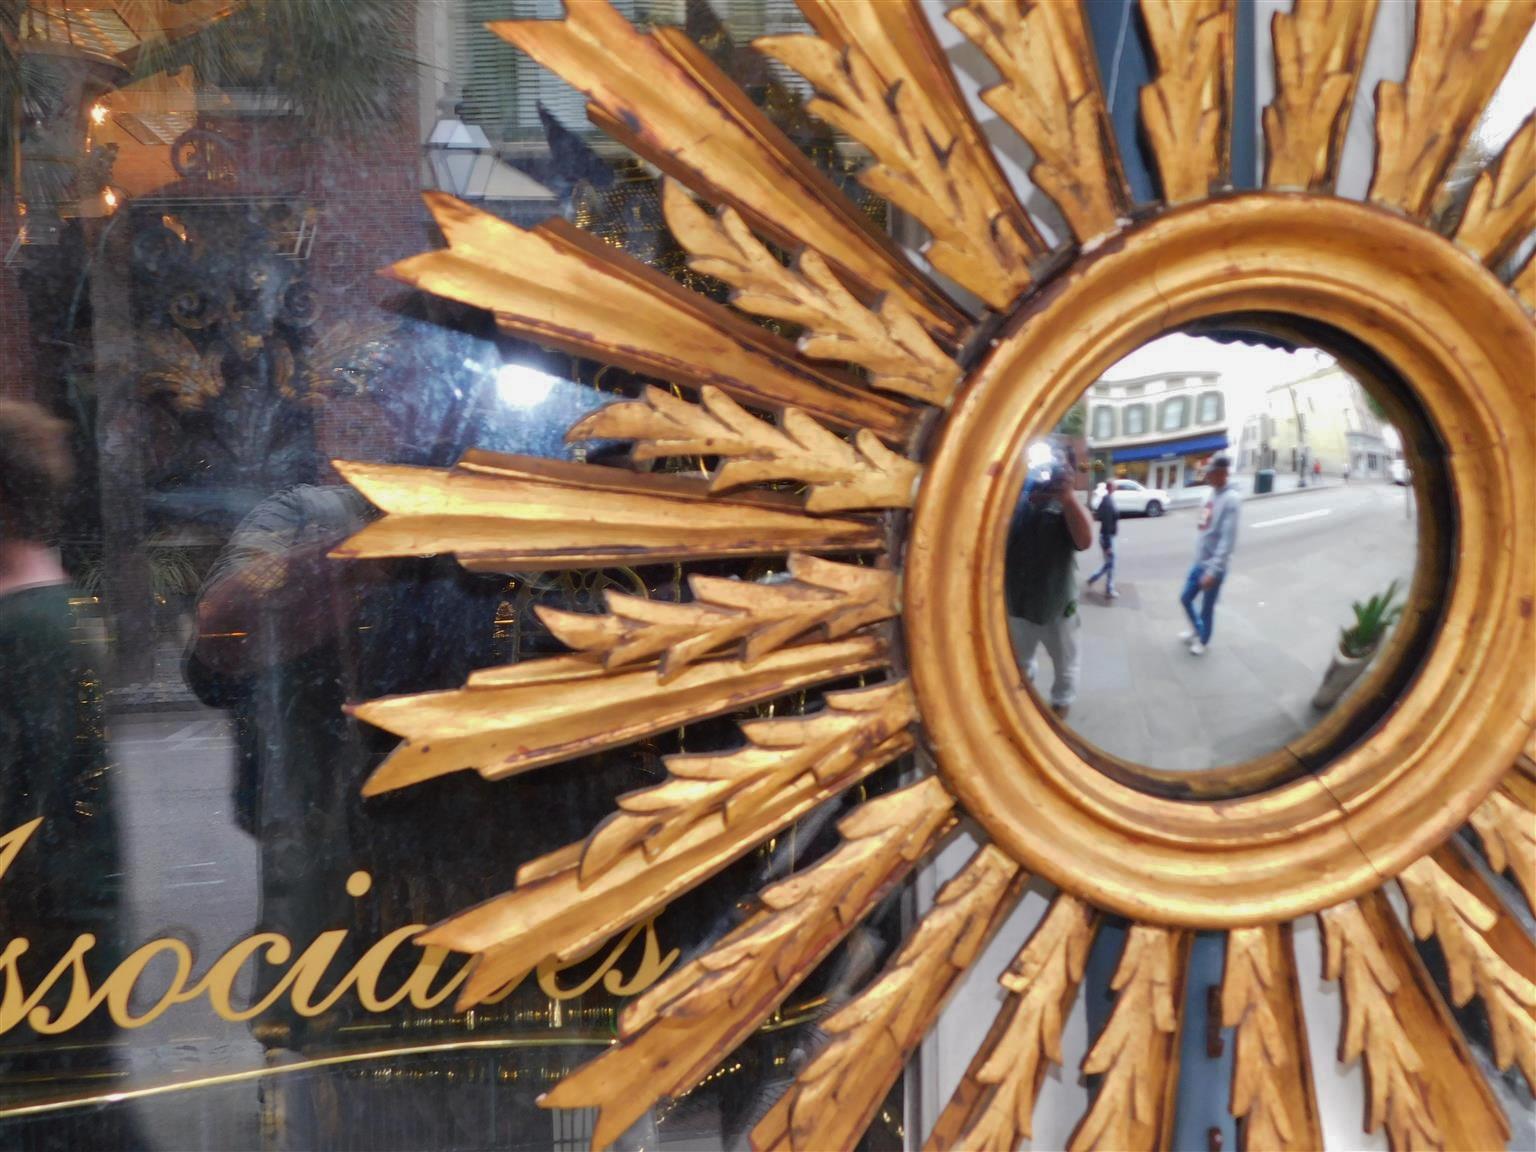 American Sunburst Gilt Carved Wood & Gesso Bullseye Wall Mirror, C. 1870 In Excellent Condition For Sale In Hollywood, SC